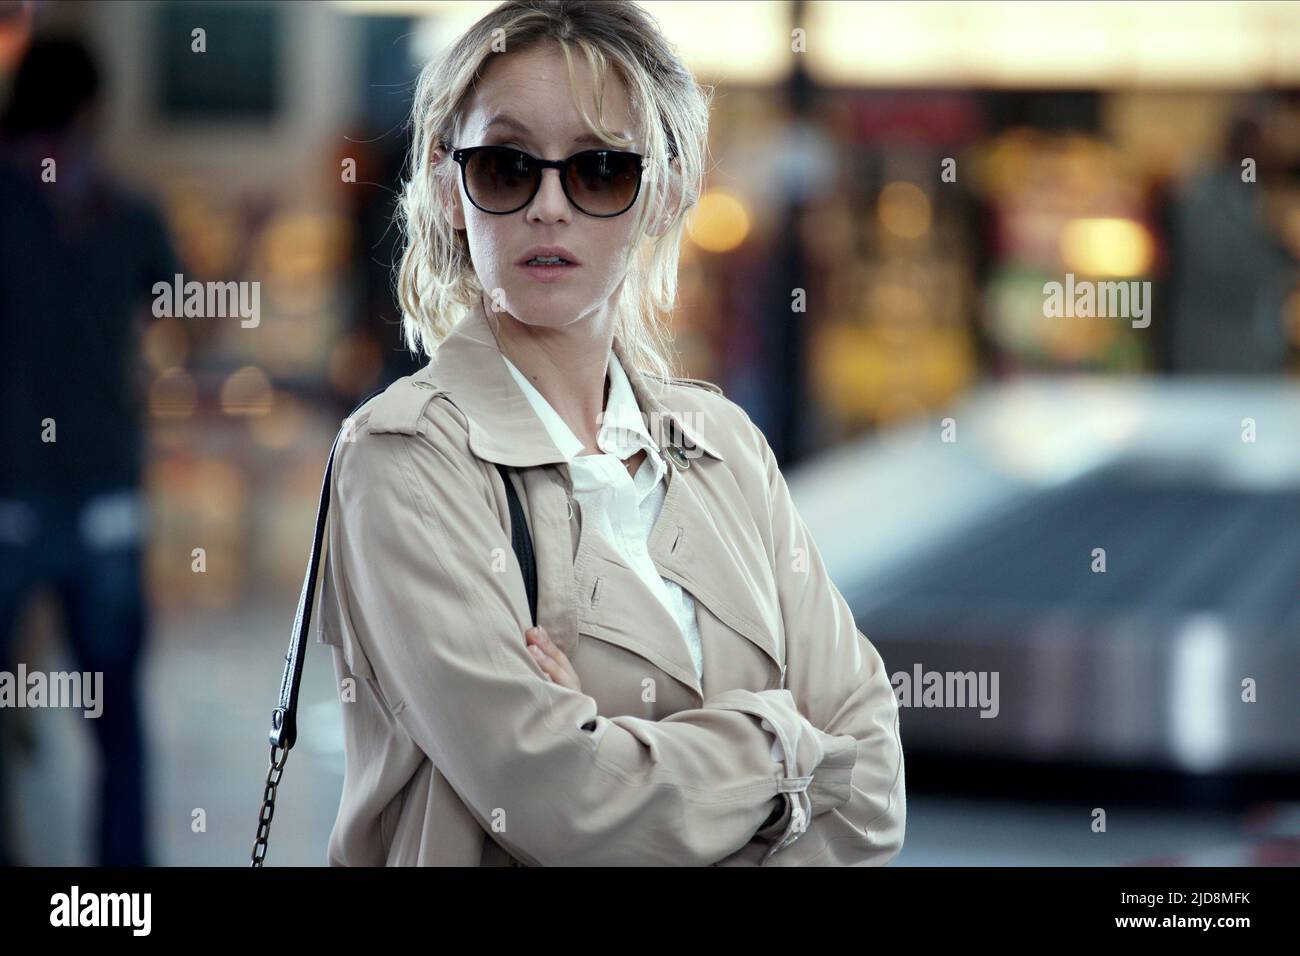 LUDIVINE SAGNIER, LOVE IS IN THE AIR, 2013, Stock Photo